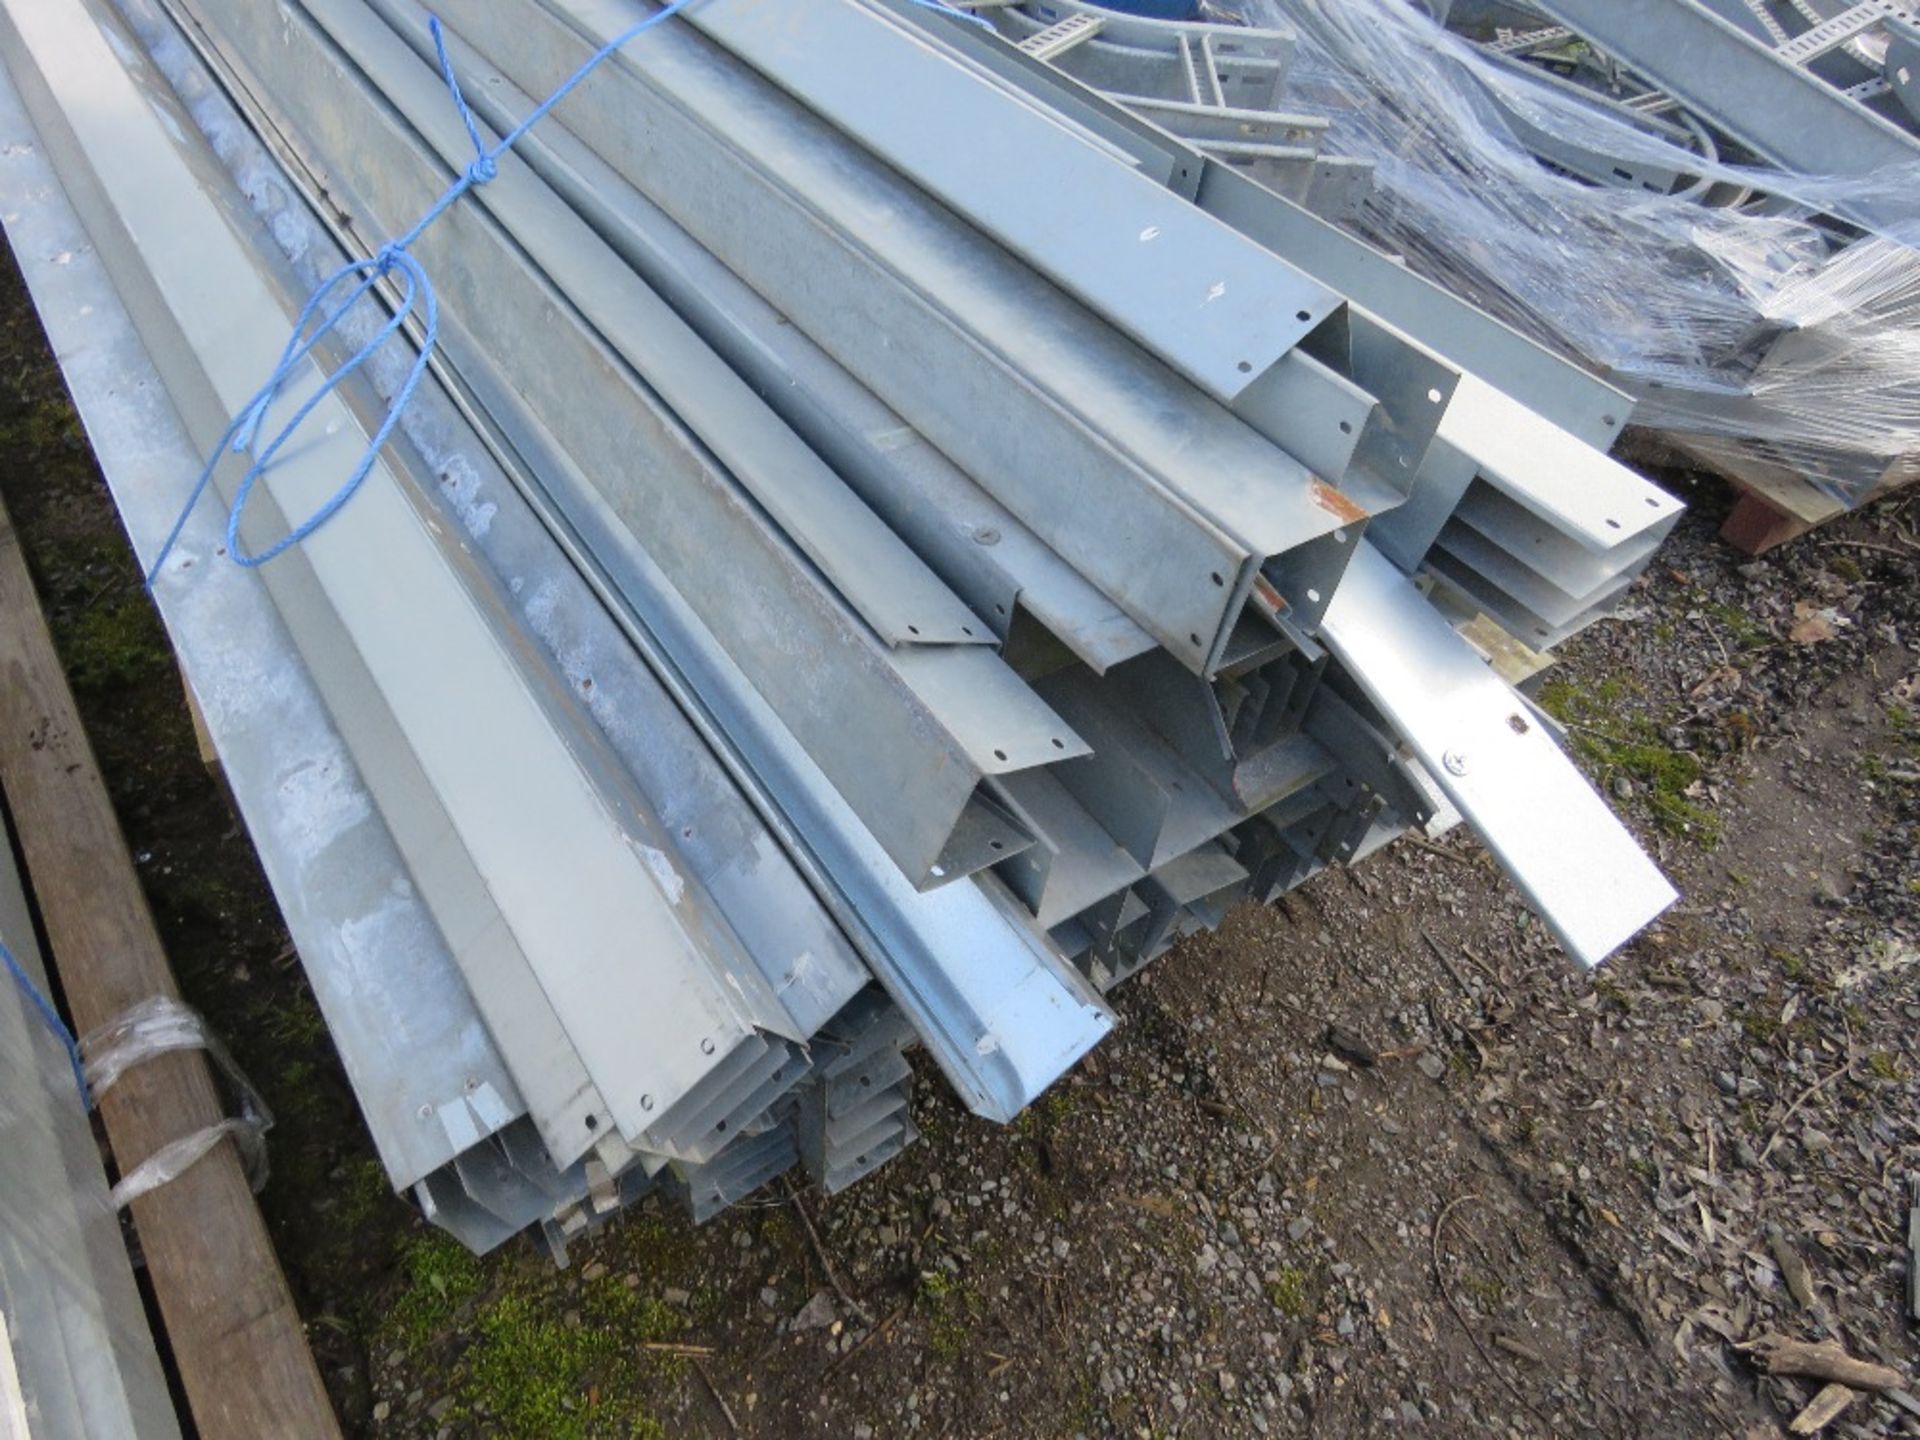 LARGE QUANTITY OF METAL DUCTING PARTS INCLUDING DUCTS AT 9FT LENGTH APPROX. SOURCED FROM COMPANY LIQ - Image 4 of 9